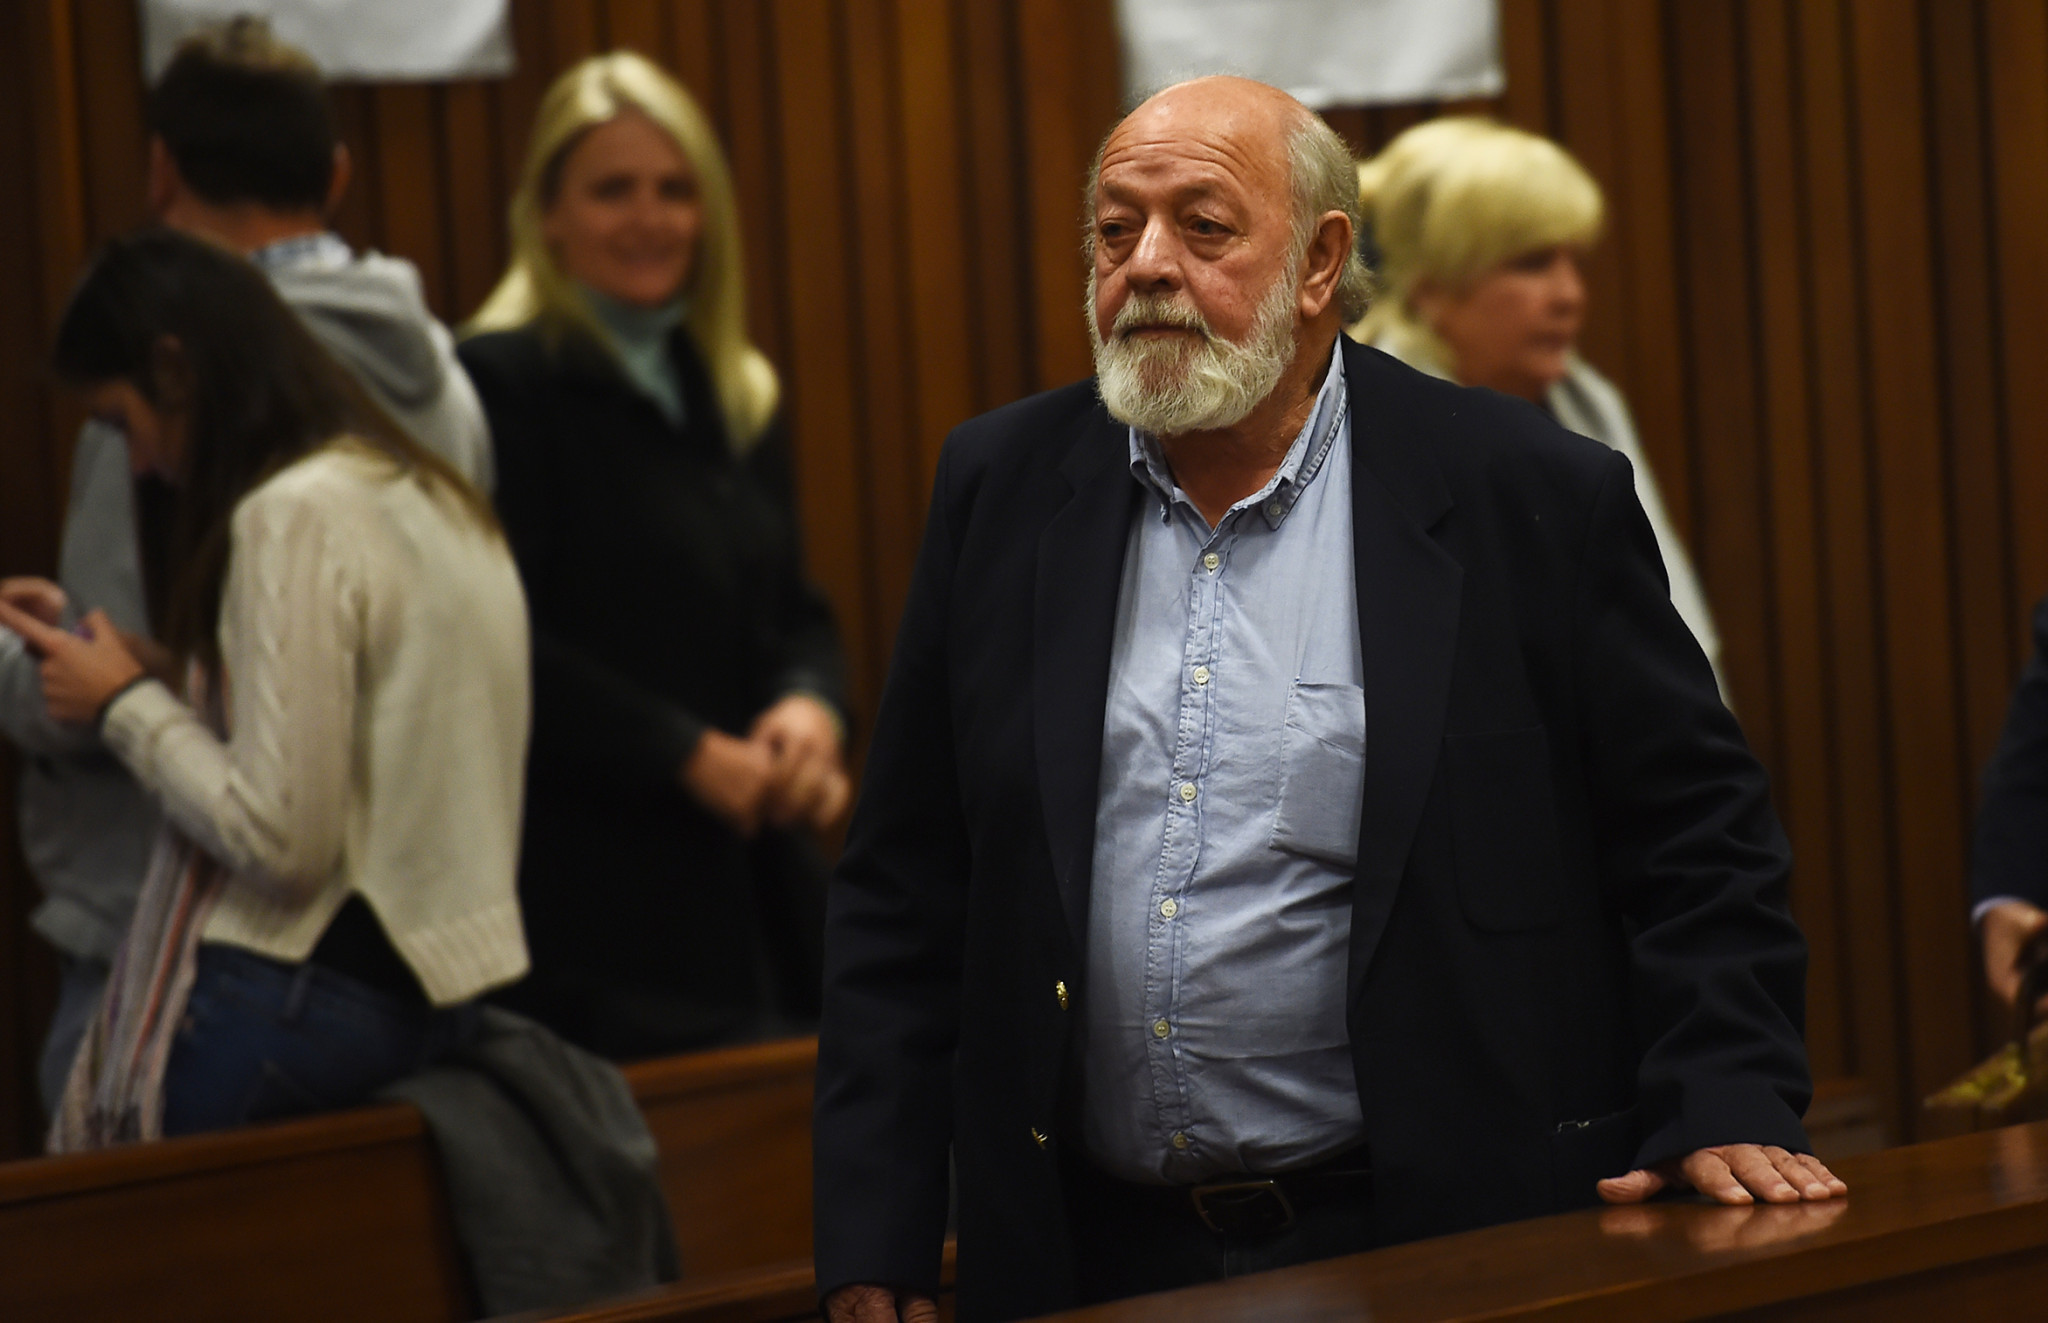 Barry Steenkamp met with Oscar Pistorius as a part of the Victim Parole Dialogue process ©Getty Images